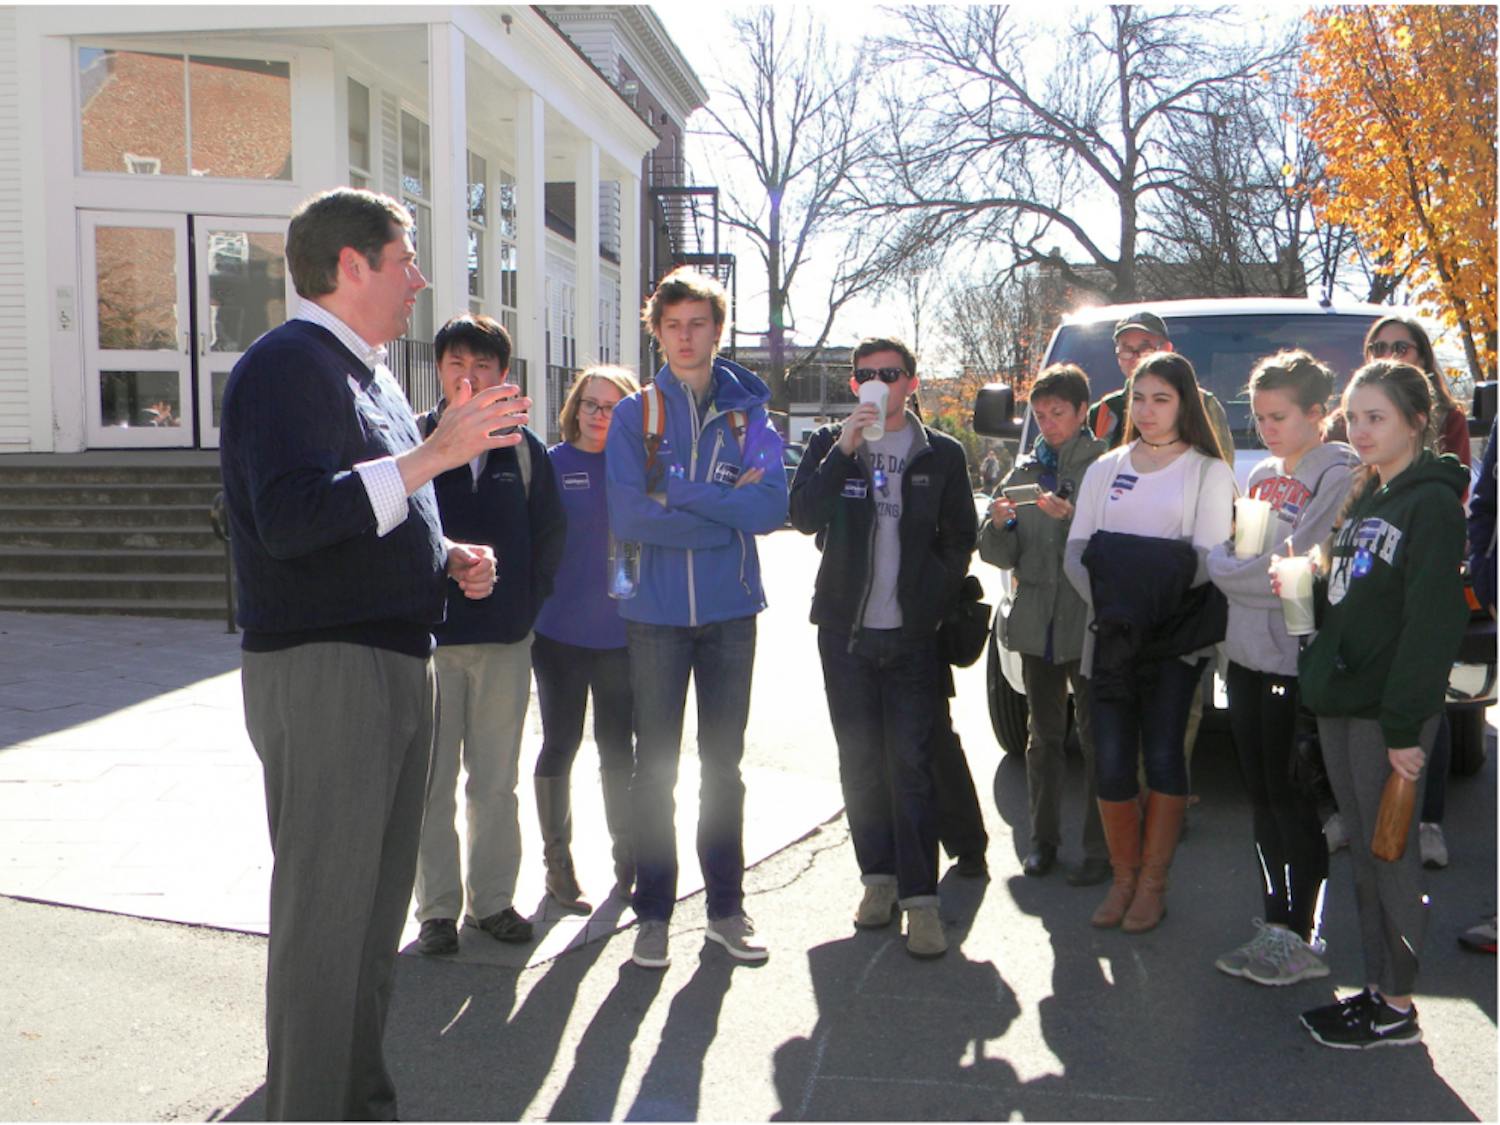 Colin Van Ostern Tu'09 campaigns outside the Collis Center on Election Day in a last-minute appeal to student voters.&nbsp;